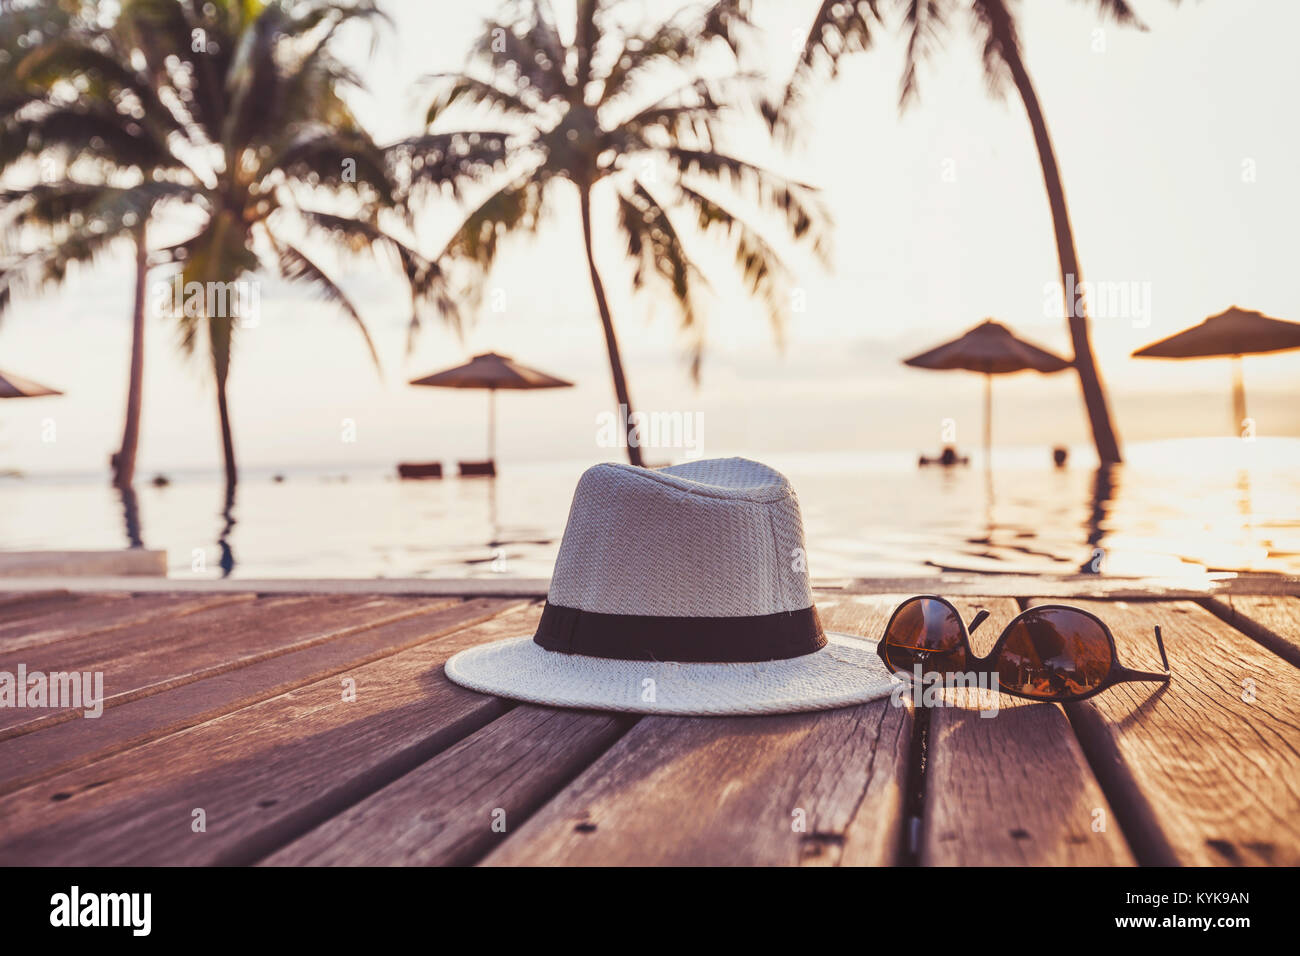 travel and tourism concept, sunglasses and hat near tropical swimming pool, beach holidays Stock Photo